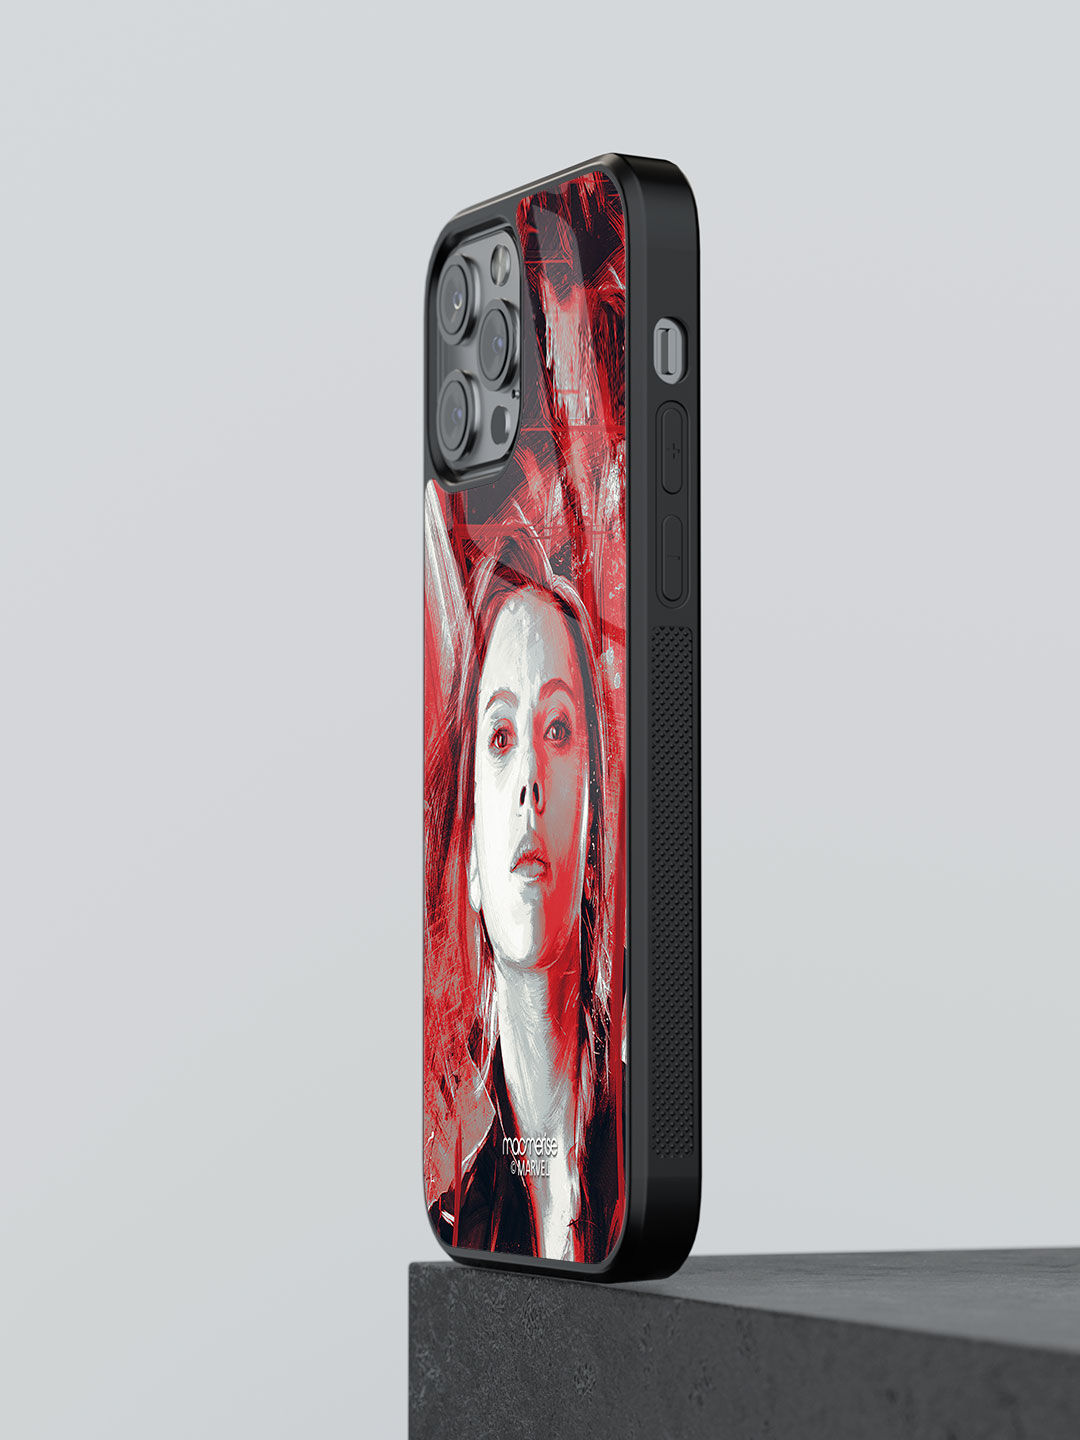 Charcoal Art Black Widow - Glass Case For iPhone 13 Pro Max